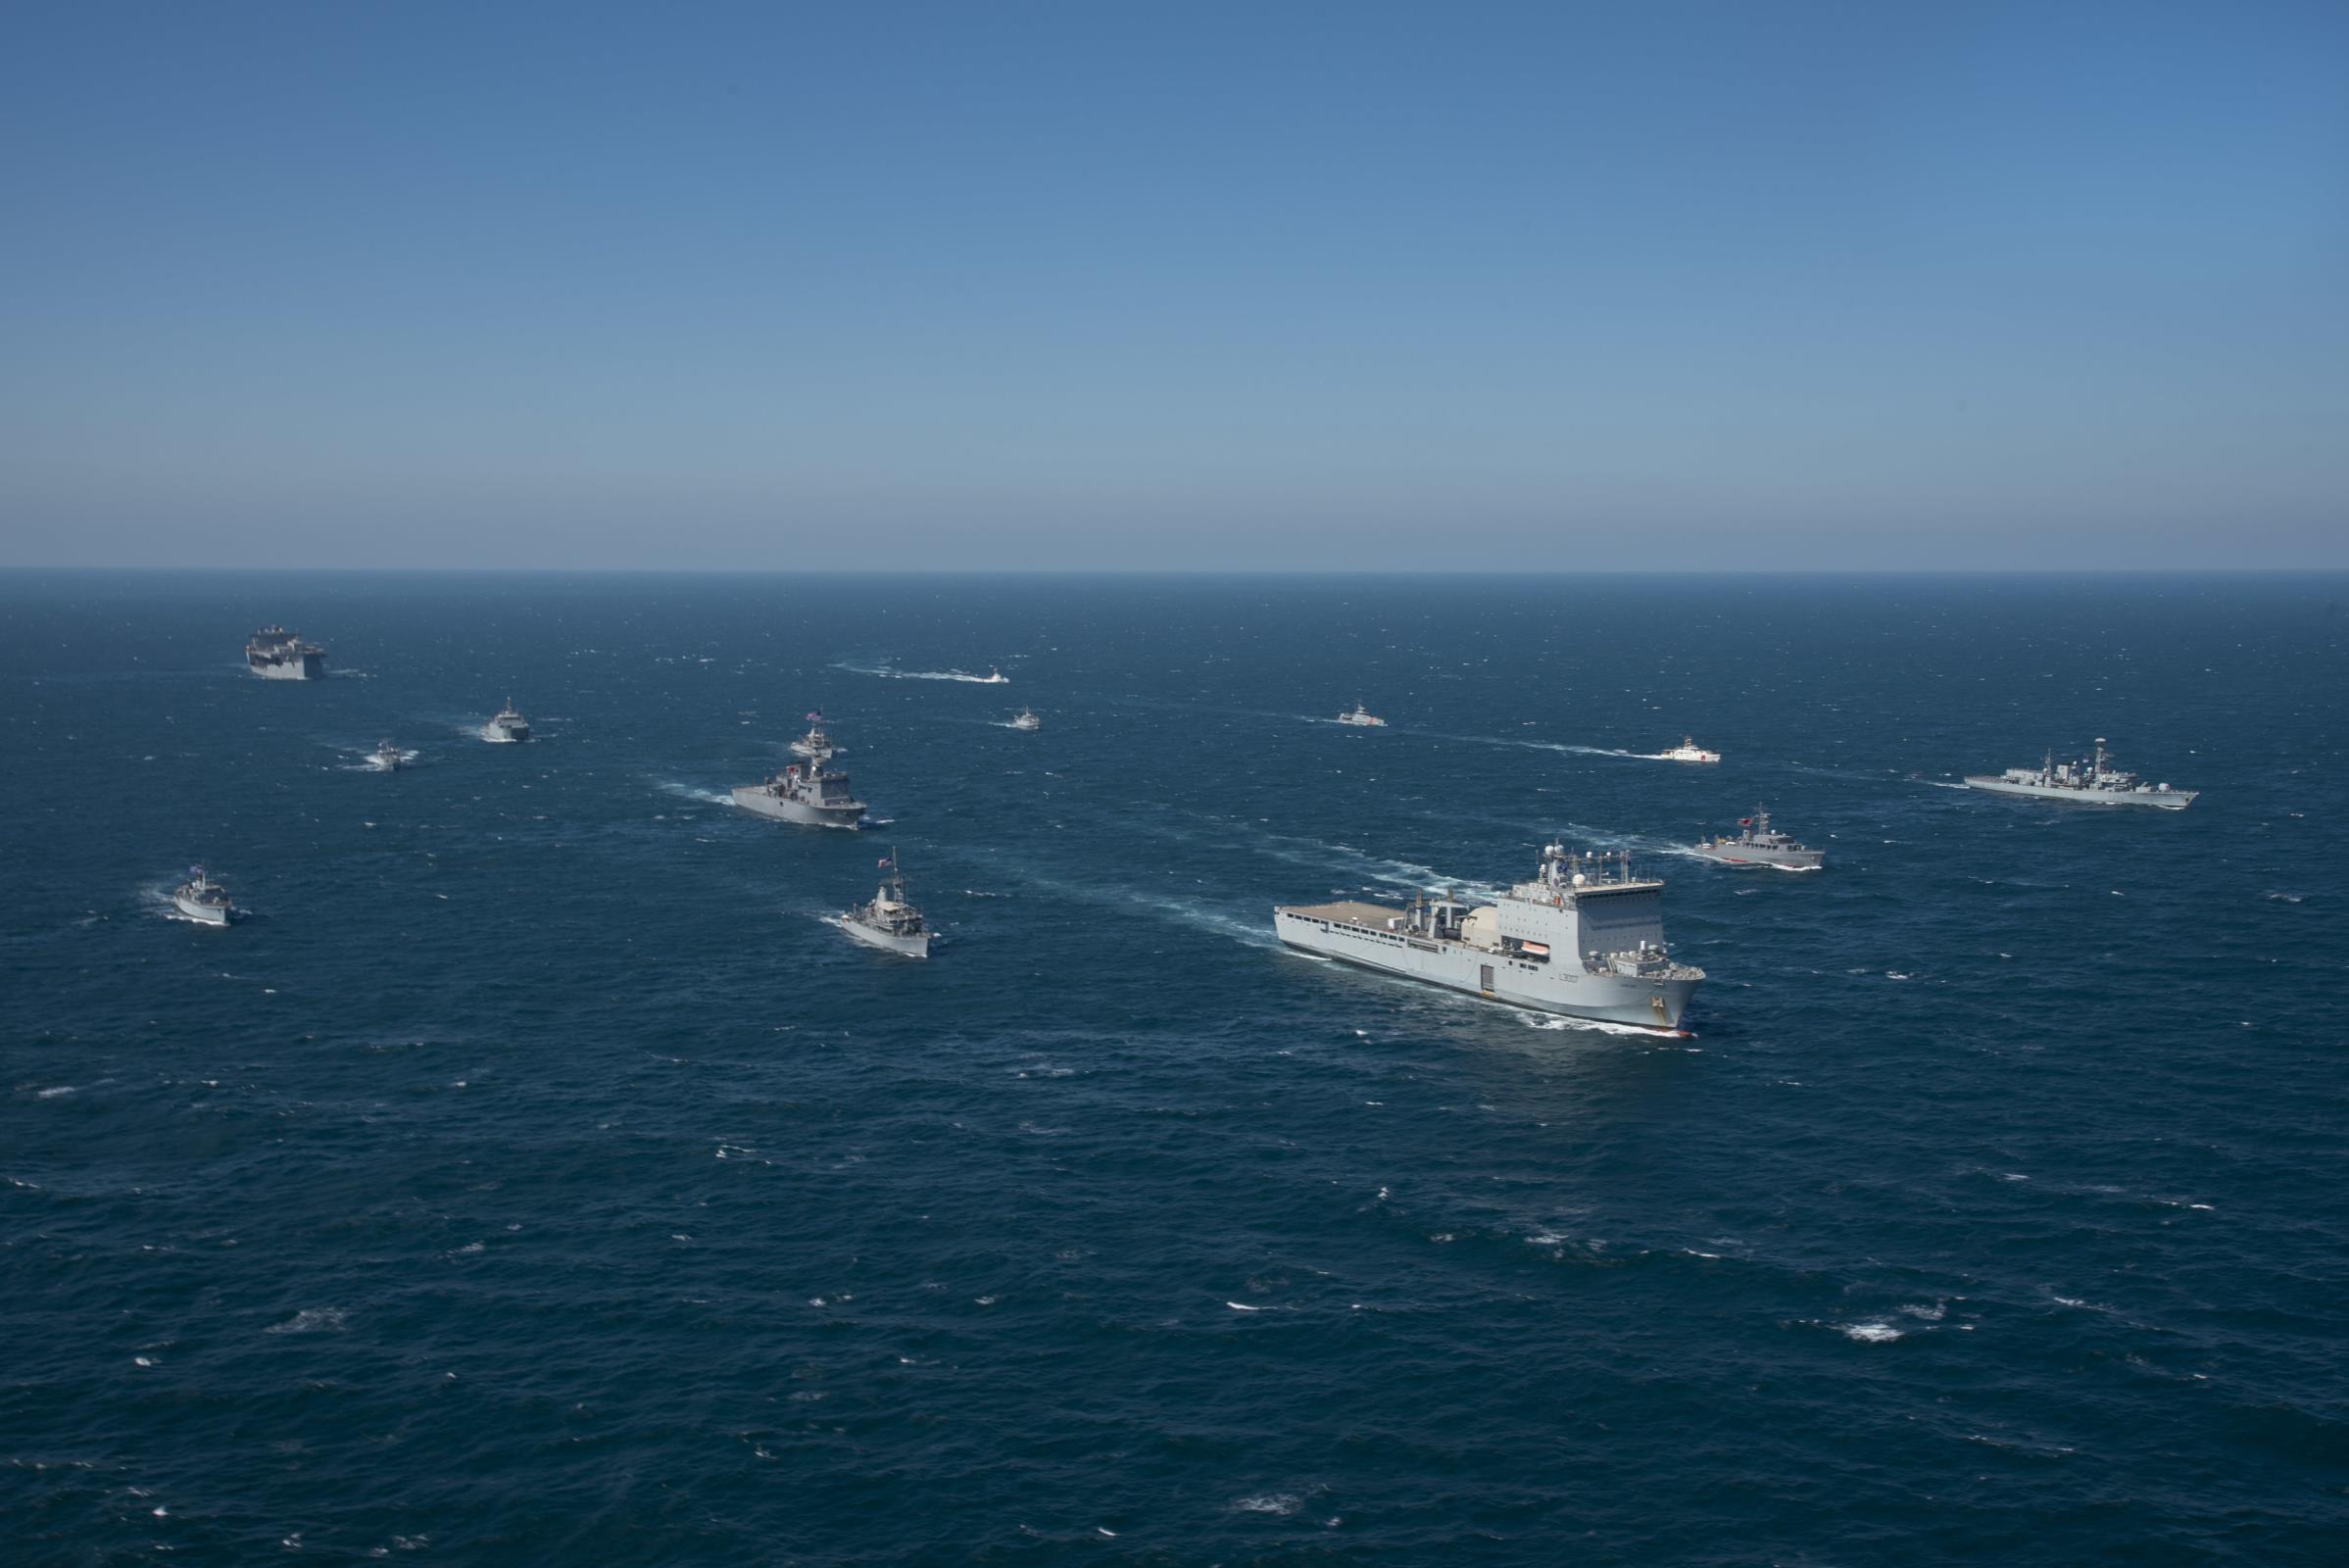 Ships from partner nations of Combined Task Force North participate in a photo exercise during International Maritime Exercise/Cutlass Express (IMX/CE) 2022 in the Arabian Gulf, Feb. 9, 2022. (U.S. Navy photo by Mass Communication Specialist 2nd Class Helen Brown)